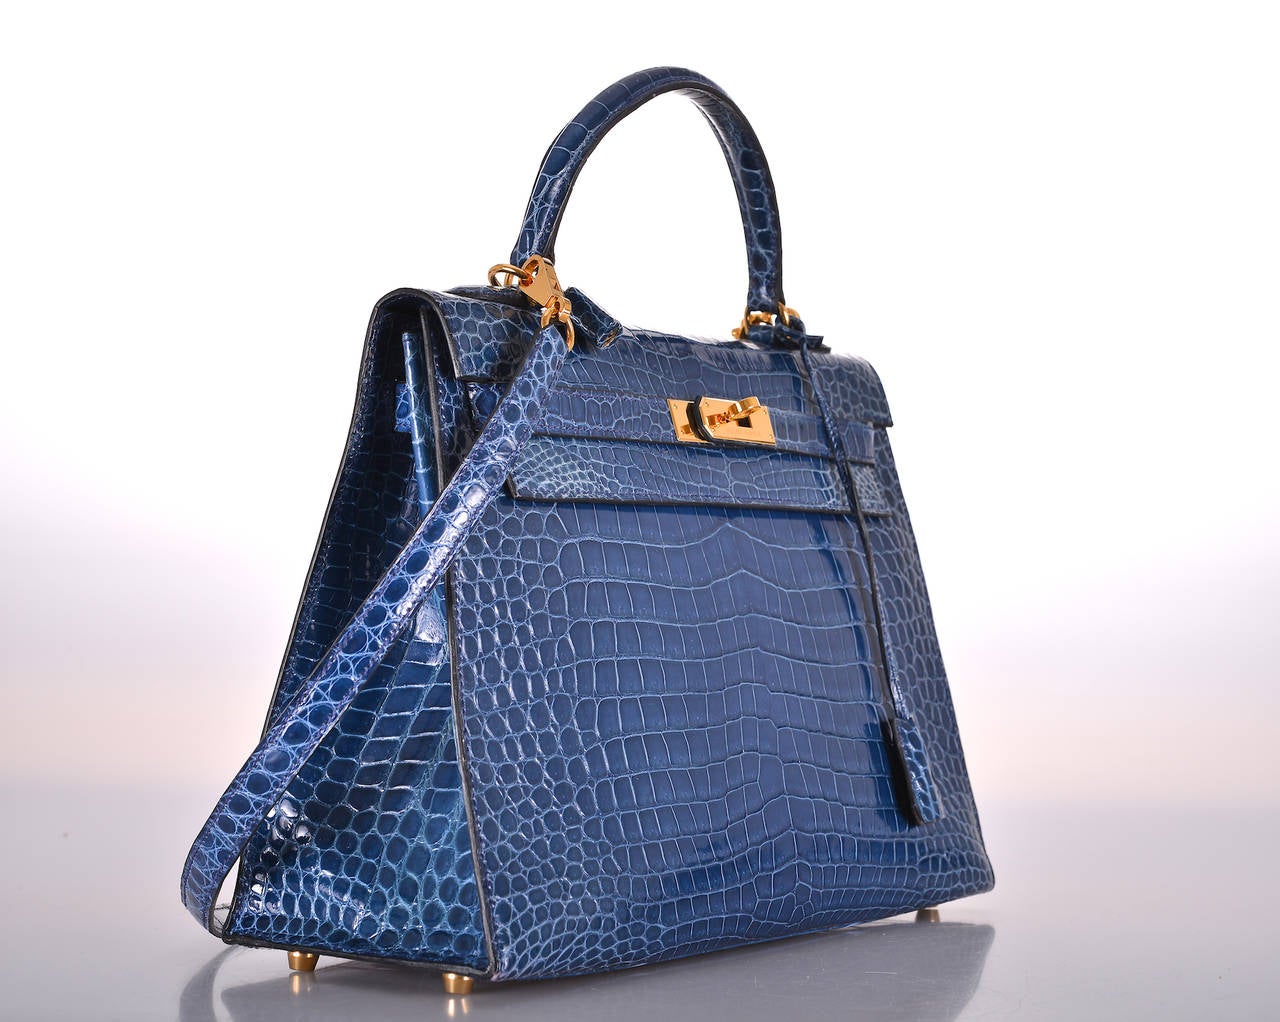 As always, another one of my fab finds! GORGEOUS BLUE ROI CROCODILE  WITH GOLD HARDWARE SUPER RARE KELLY.

WHAT A STATEMENT! THE BAG IS IN ABSOLUTE PRISTINE CONDITION!